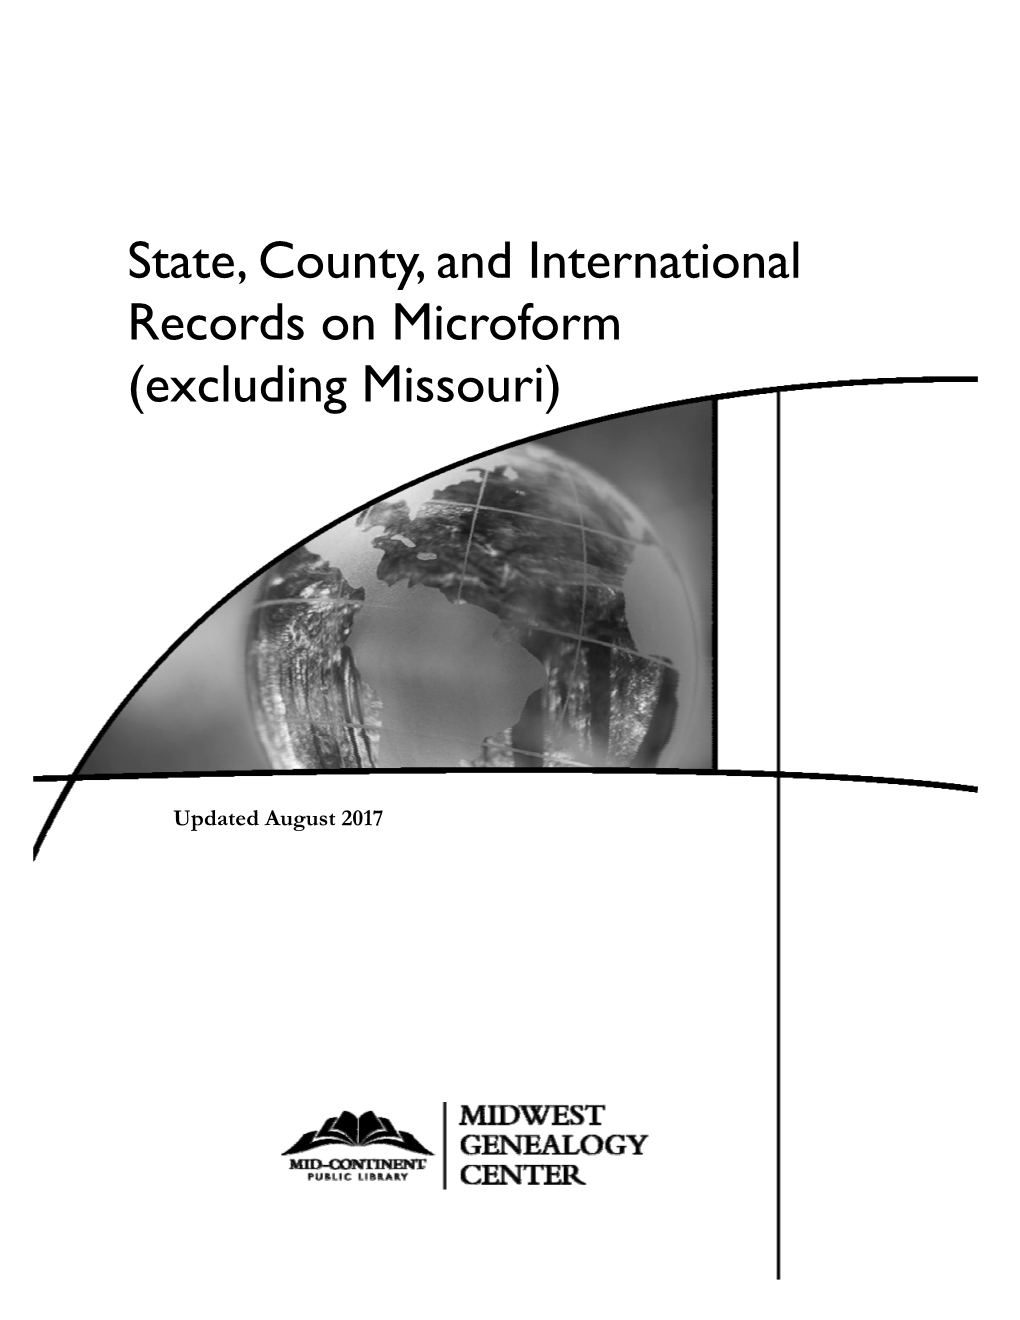 State, County, and International Records on Microform